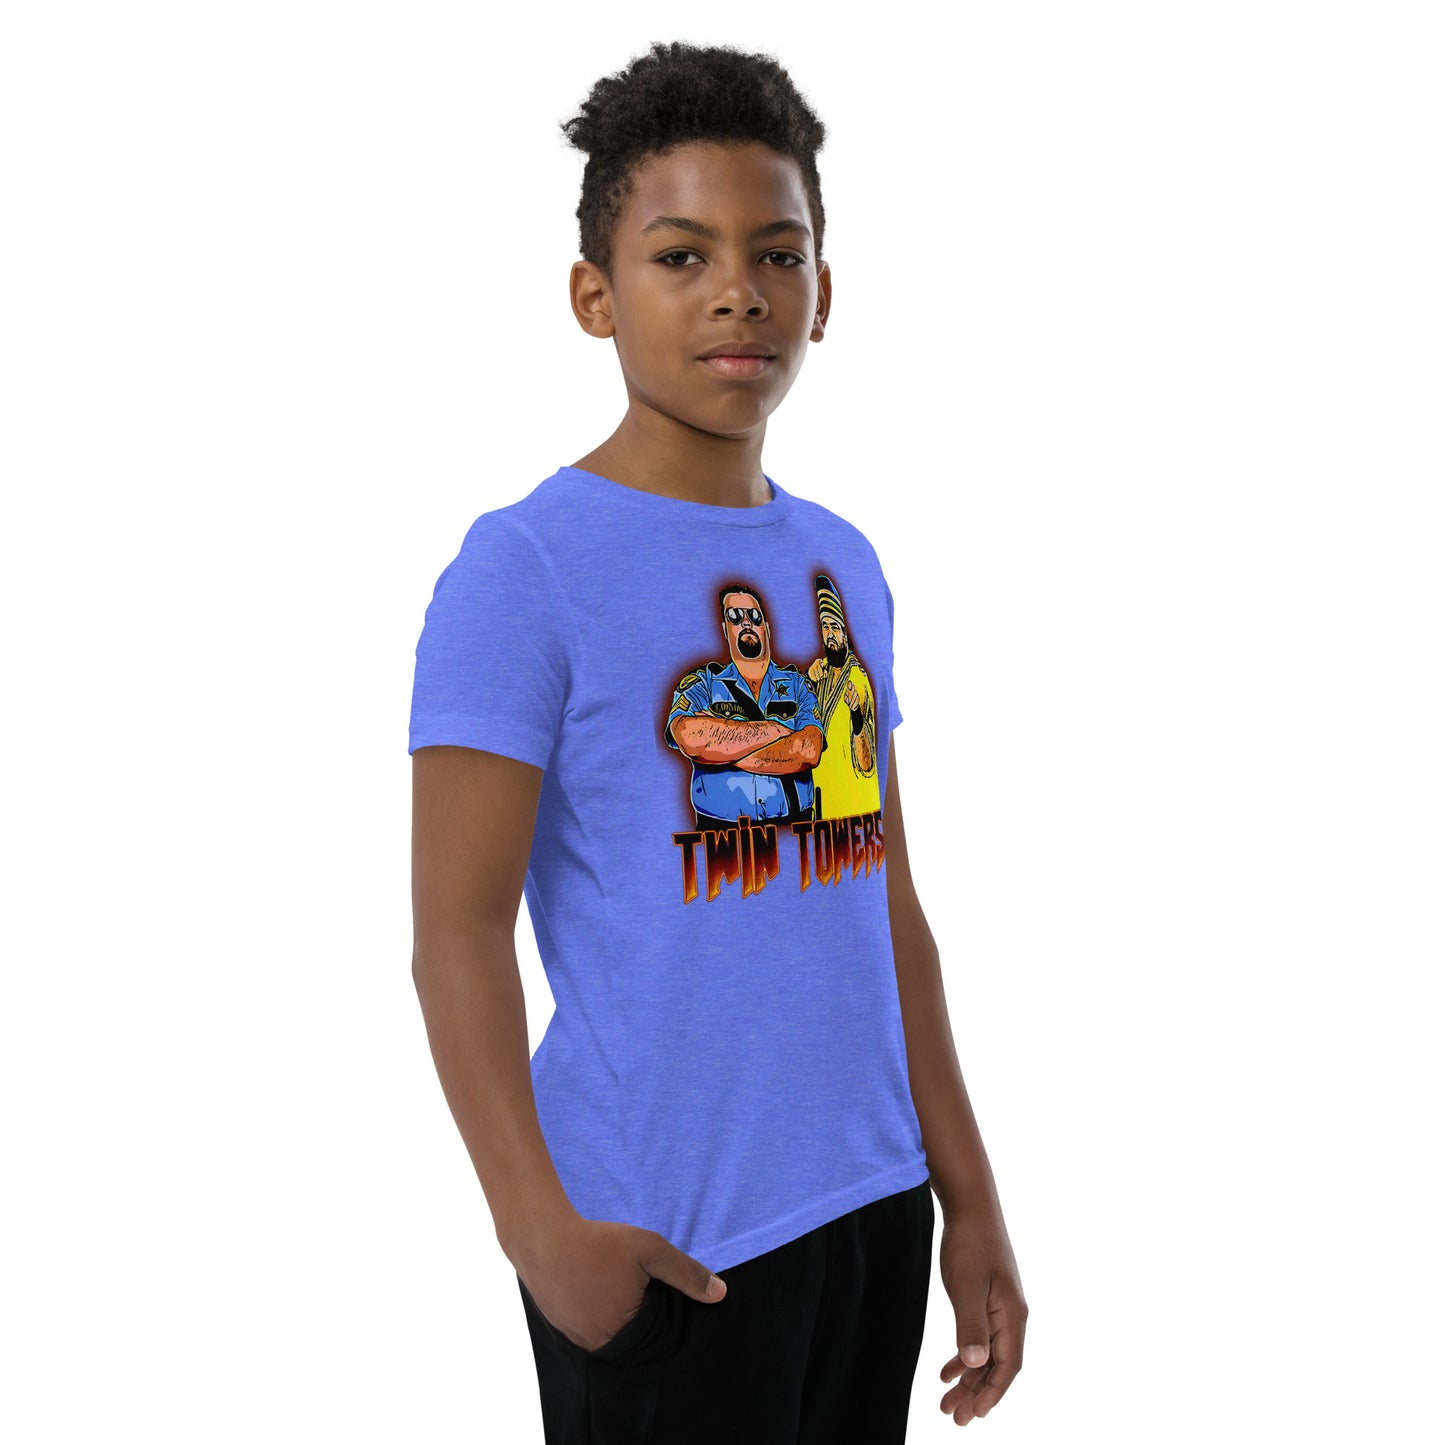 Twin Towers Wrestling Tag Team Tee: Unite for Unstoppable Power